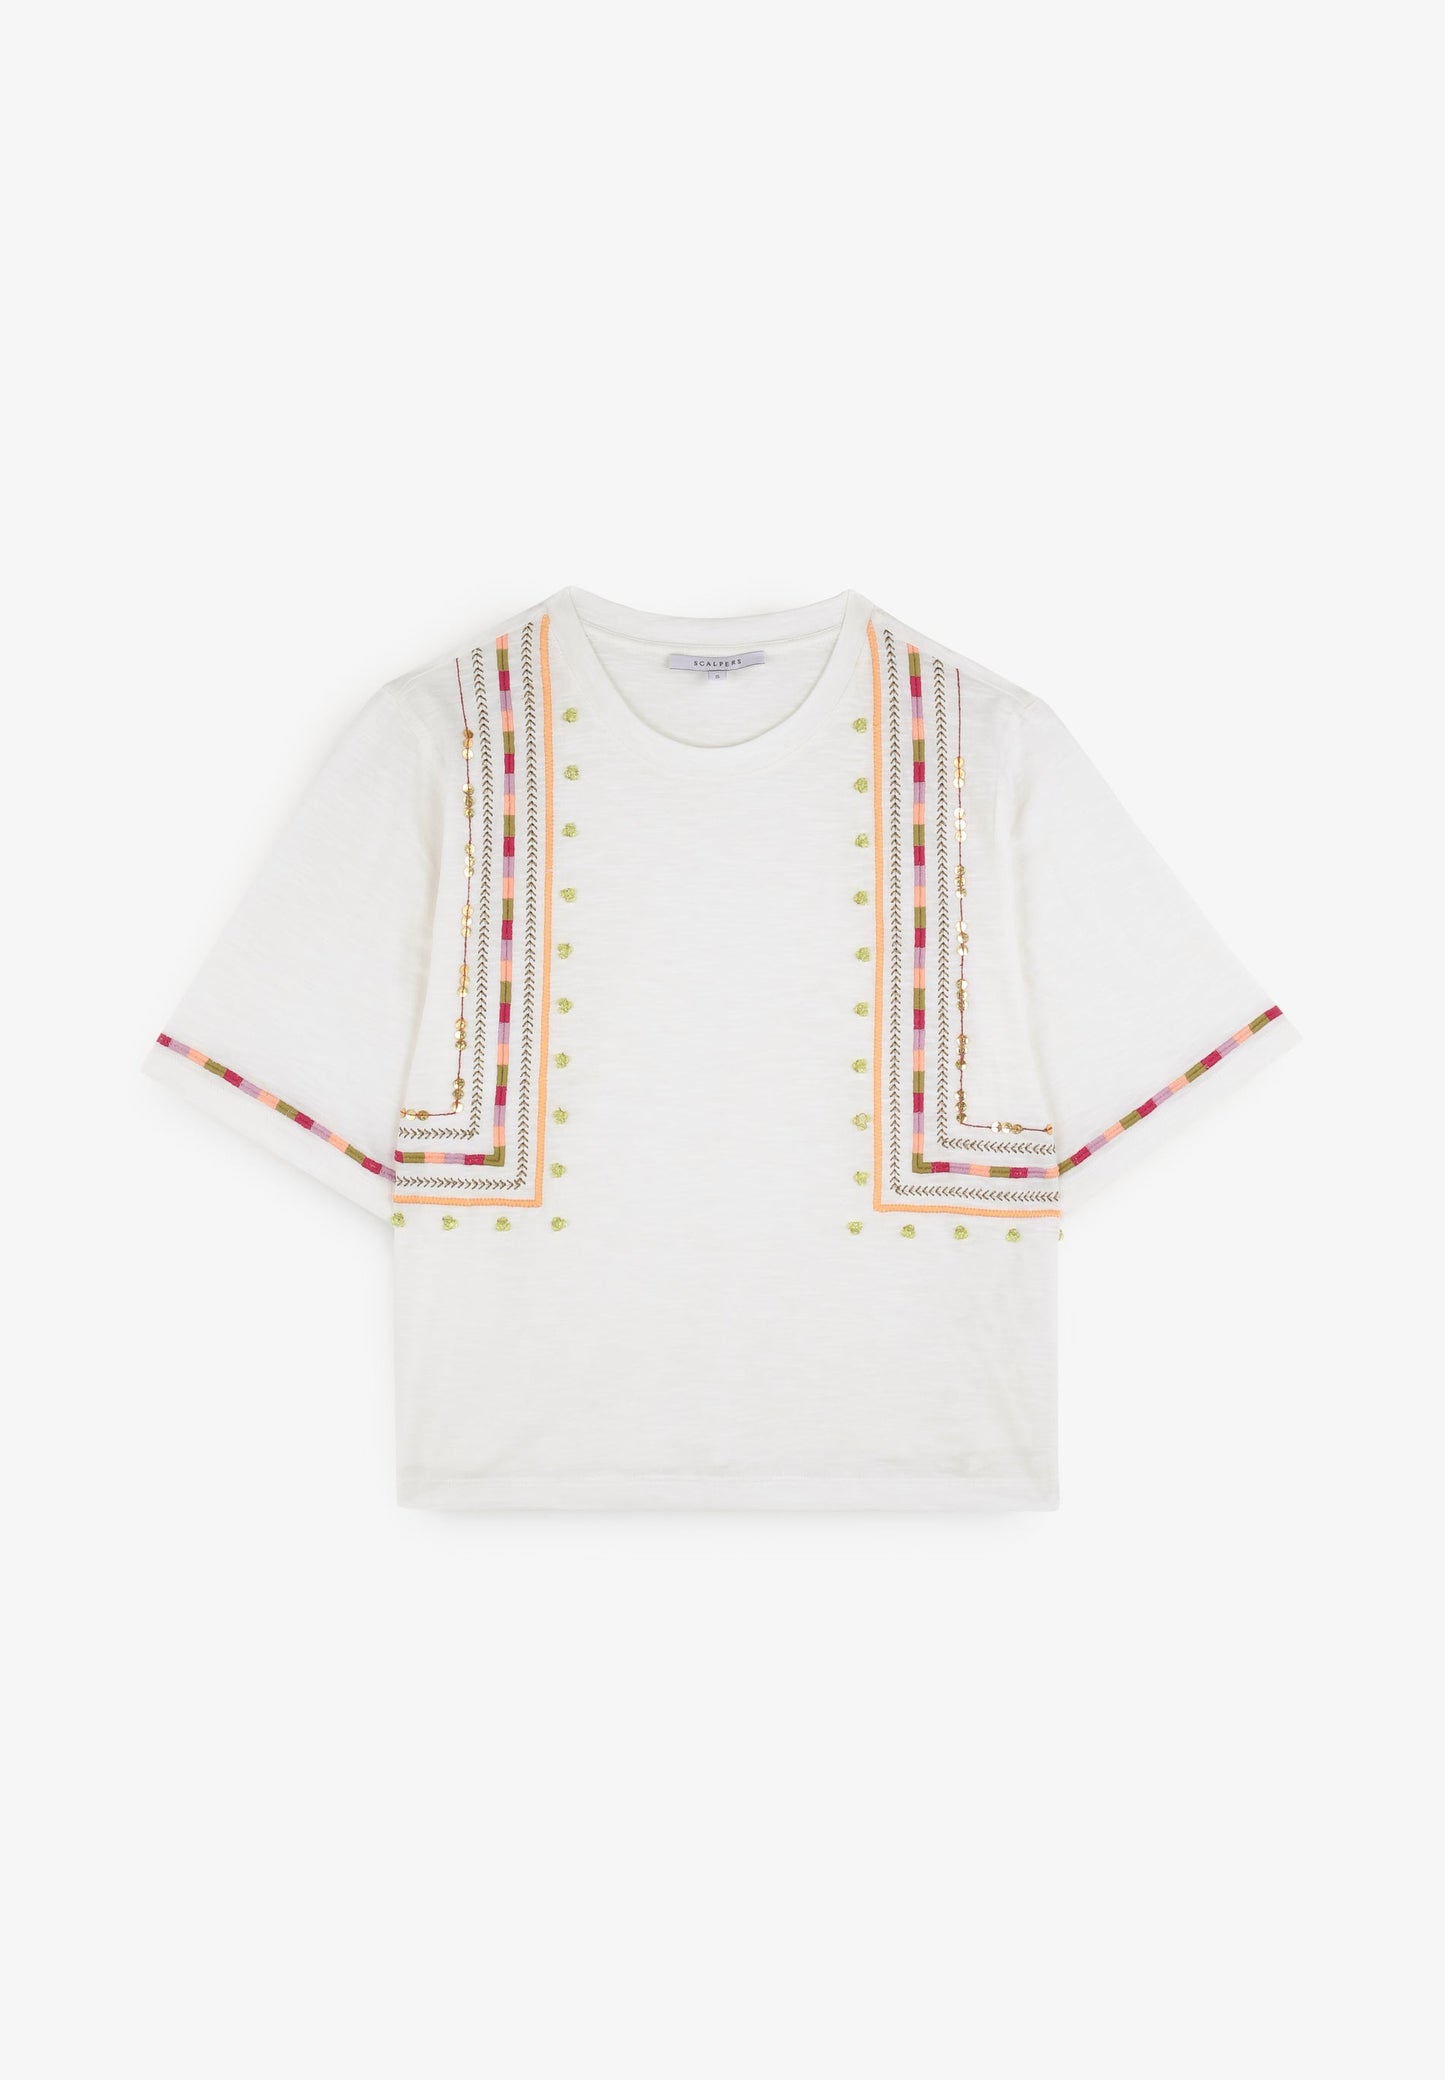 EMBROIDERED ETHNIC T-SHIRT